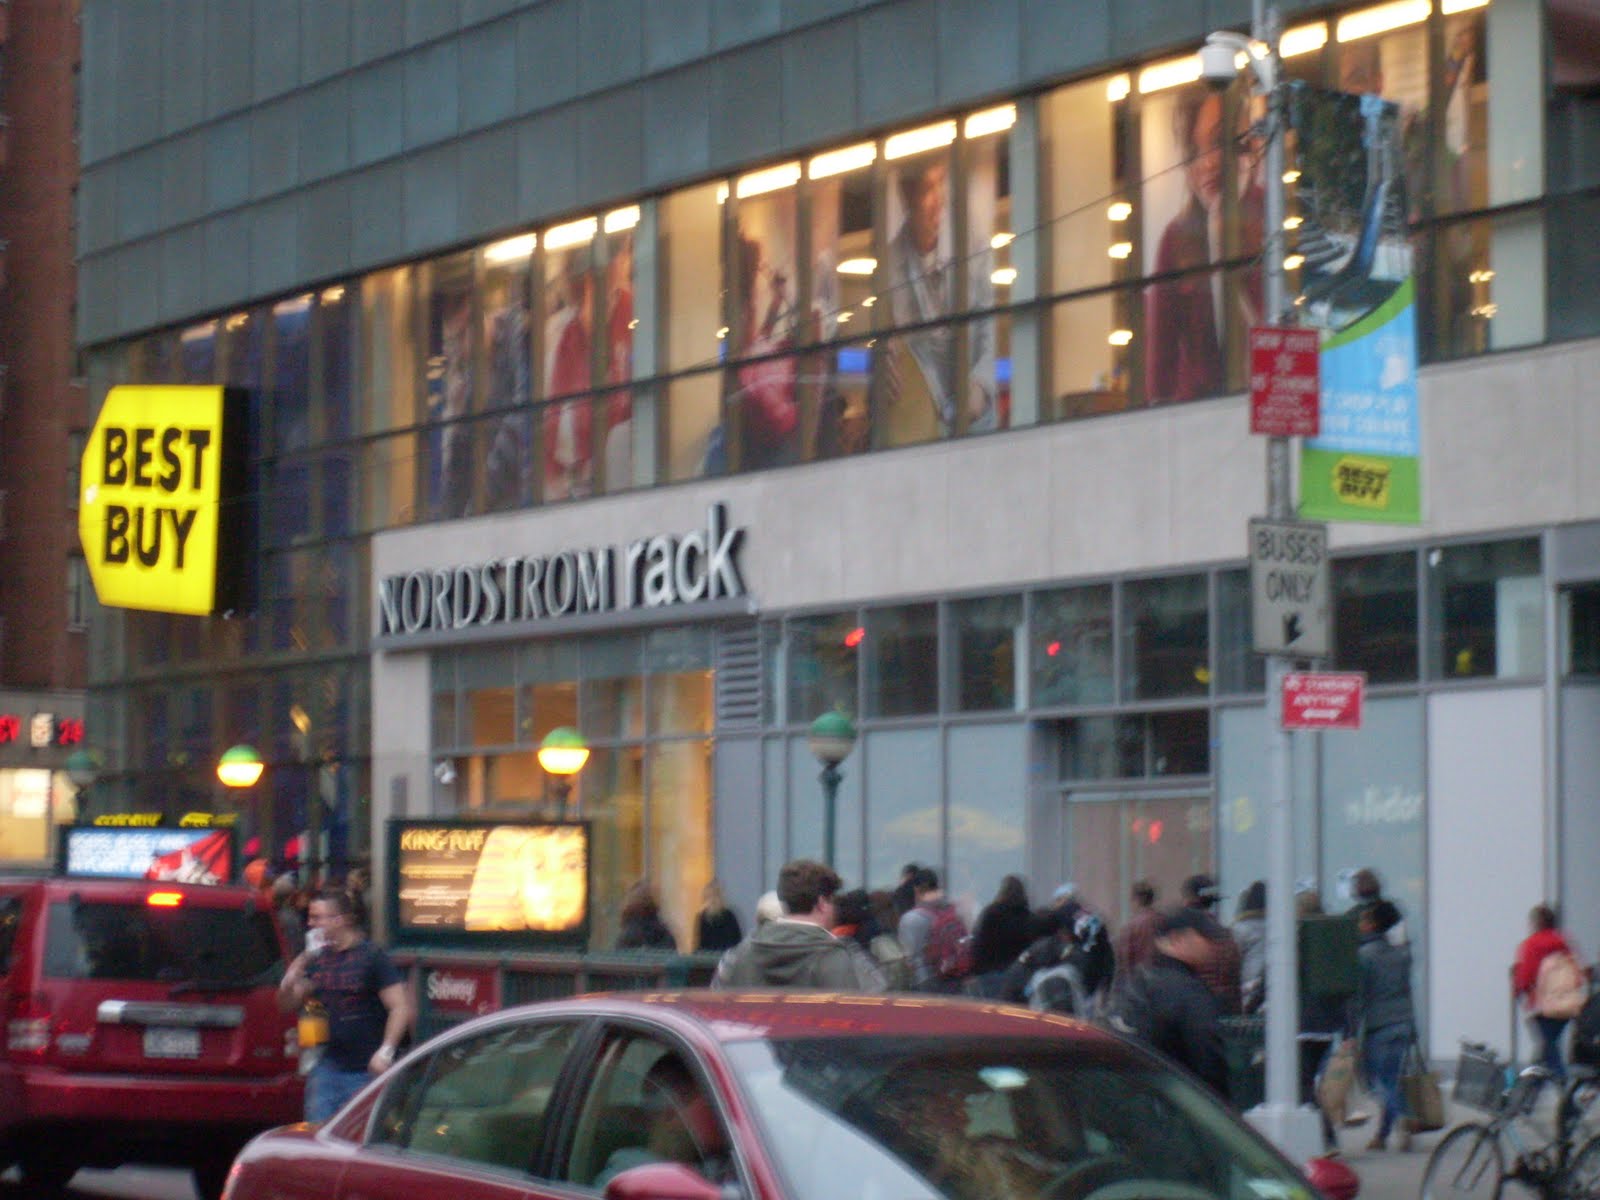 ... exactly the new nordstrom rack opened in union square yesterday and i